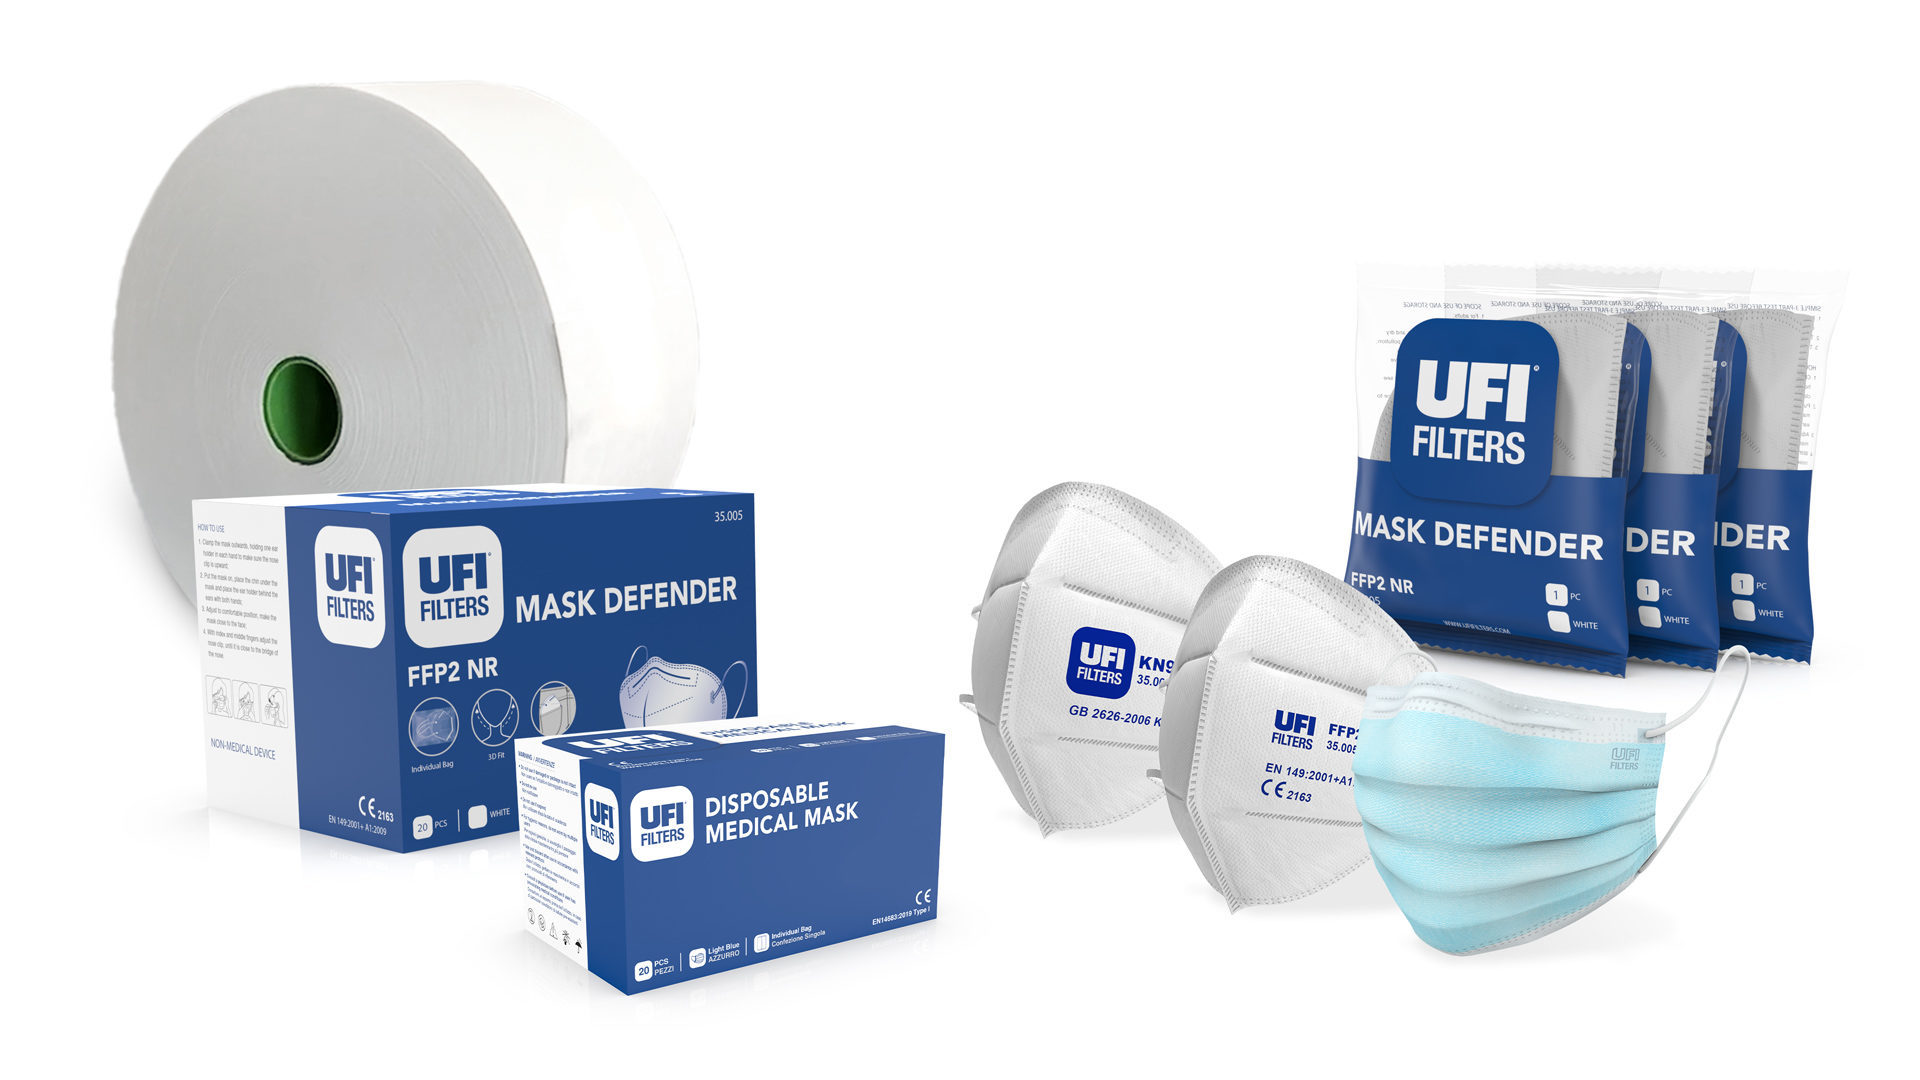 From Meltblown to UFI Filters face masks - UFI Filters